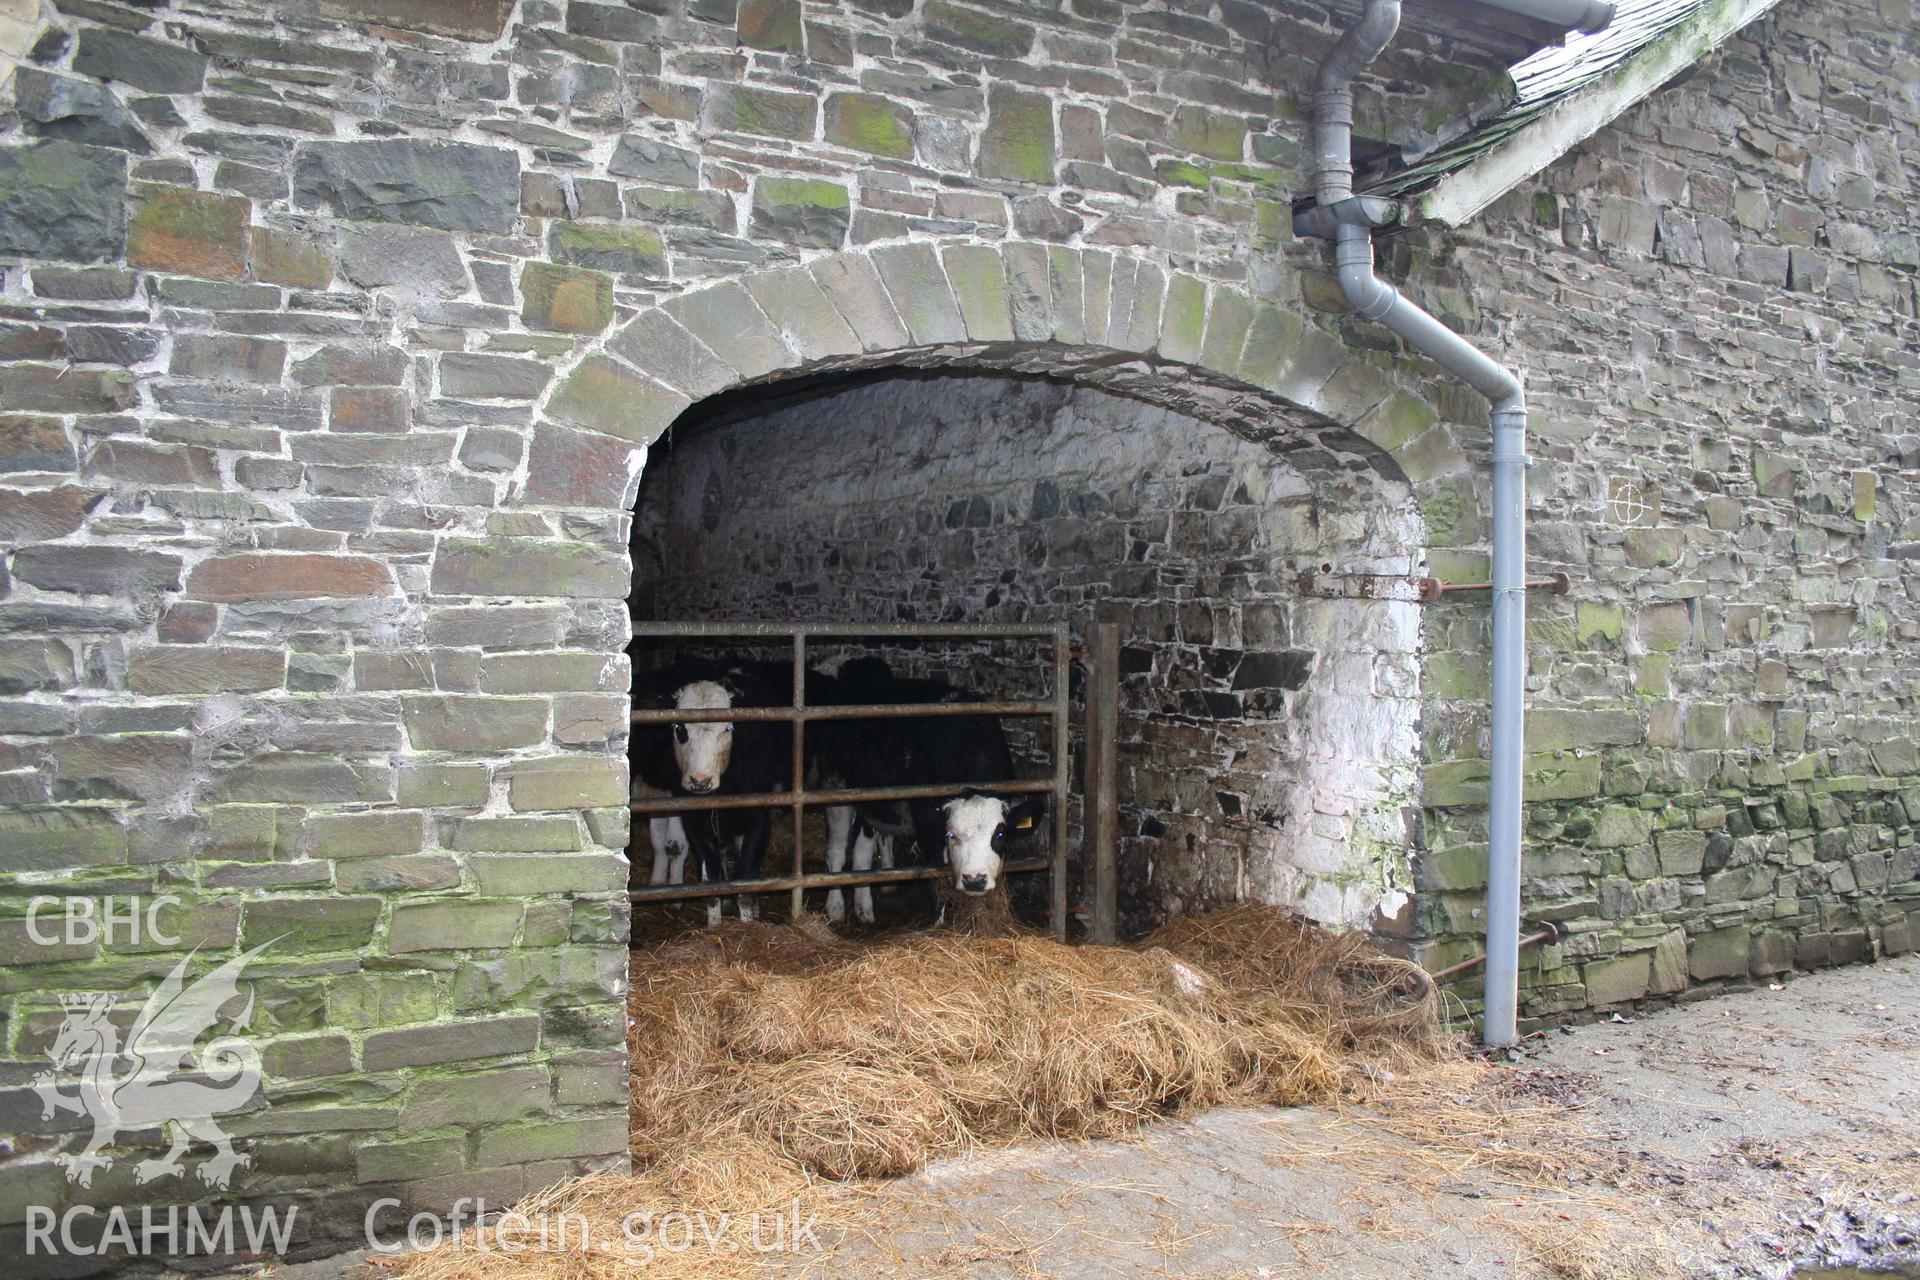 Exterior view of cattle shelter showing stone wall and archway. Photographic survey of the exterior of the farm buildings at Tan-y-Graig Farm, Llanfarian, Aberystwyth. Conducted by Geoff Ward and John Wiles, 11th December 2006.